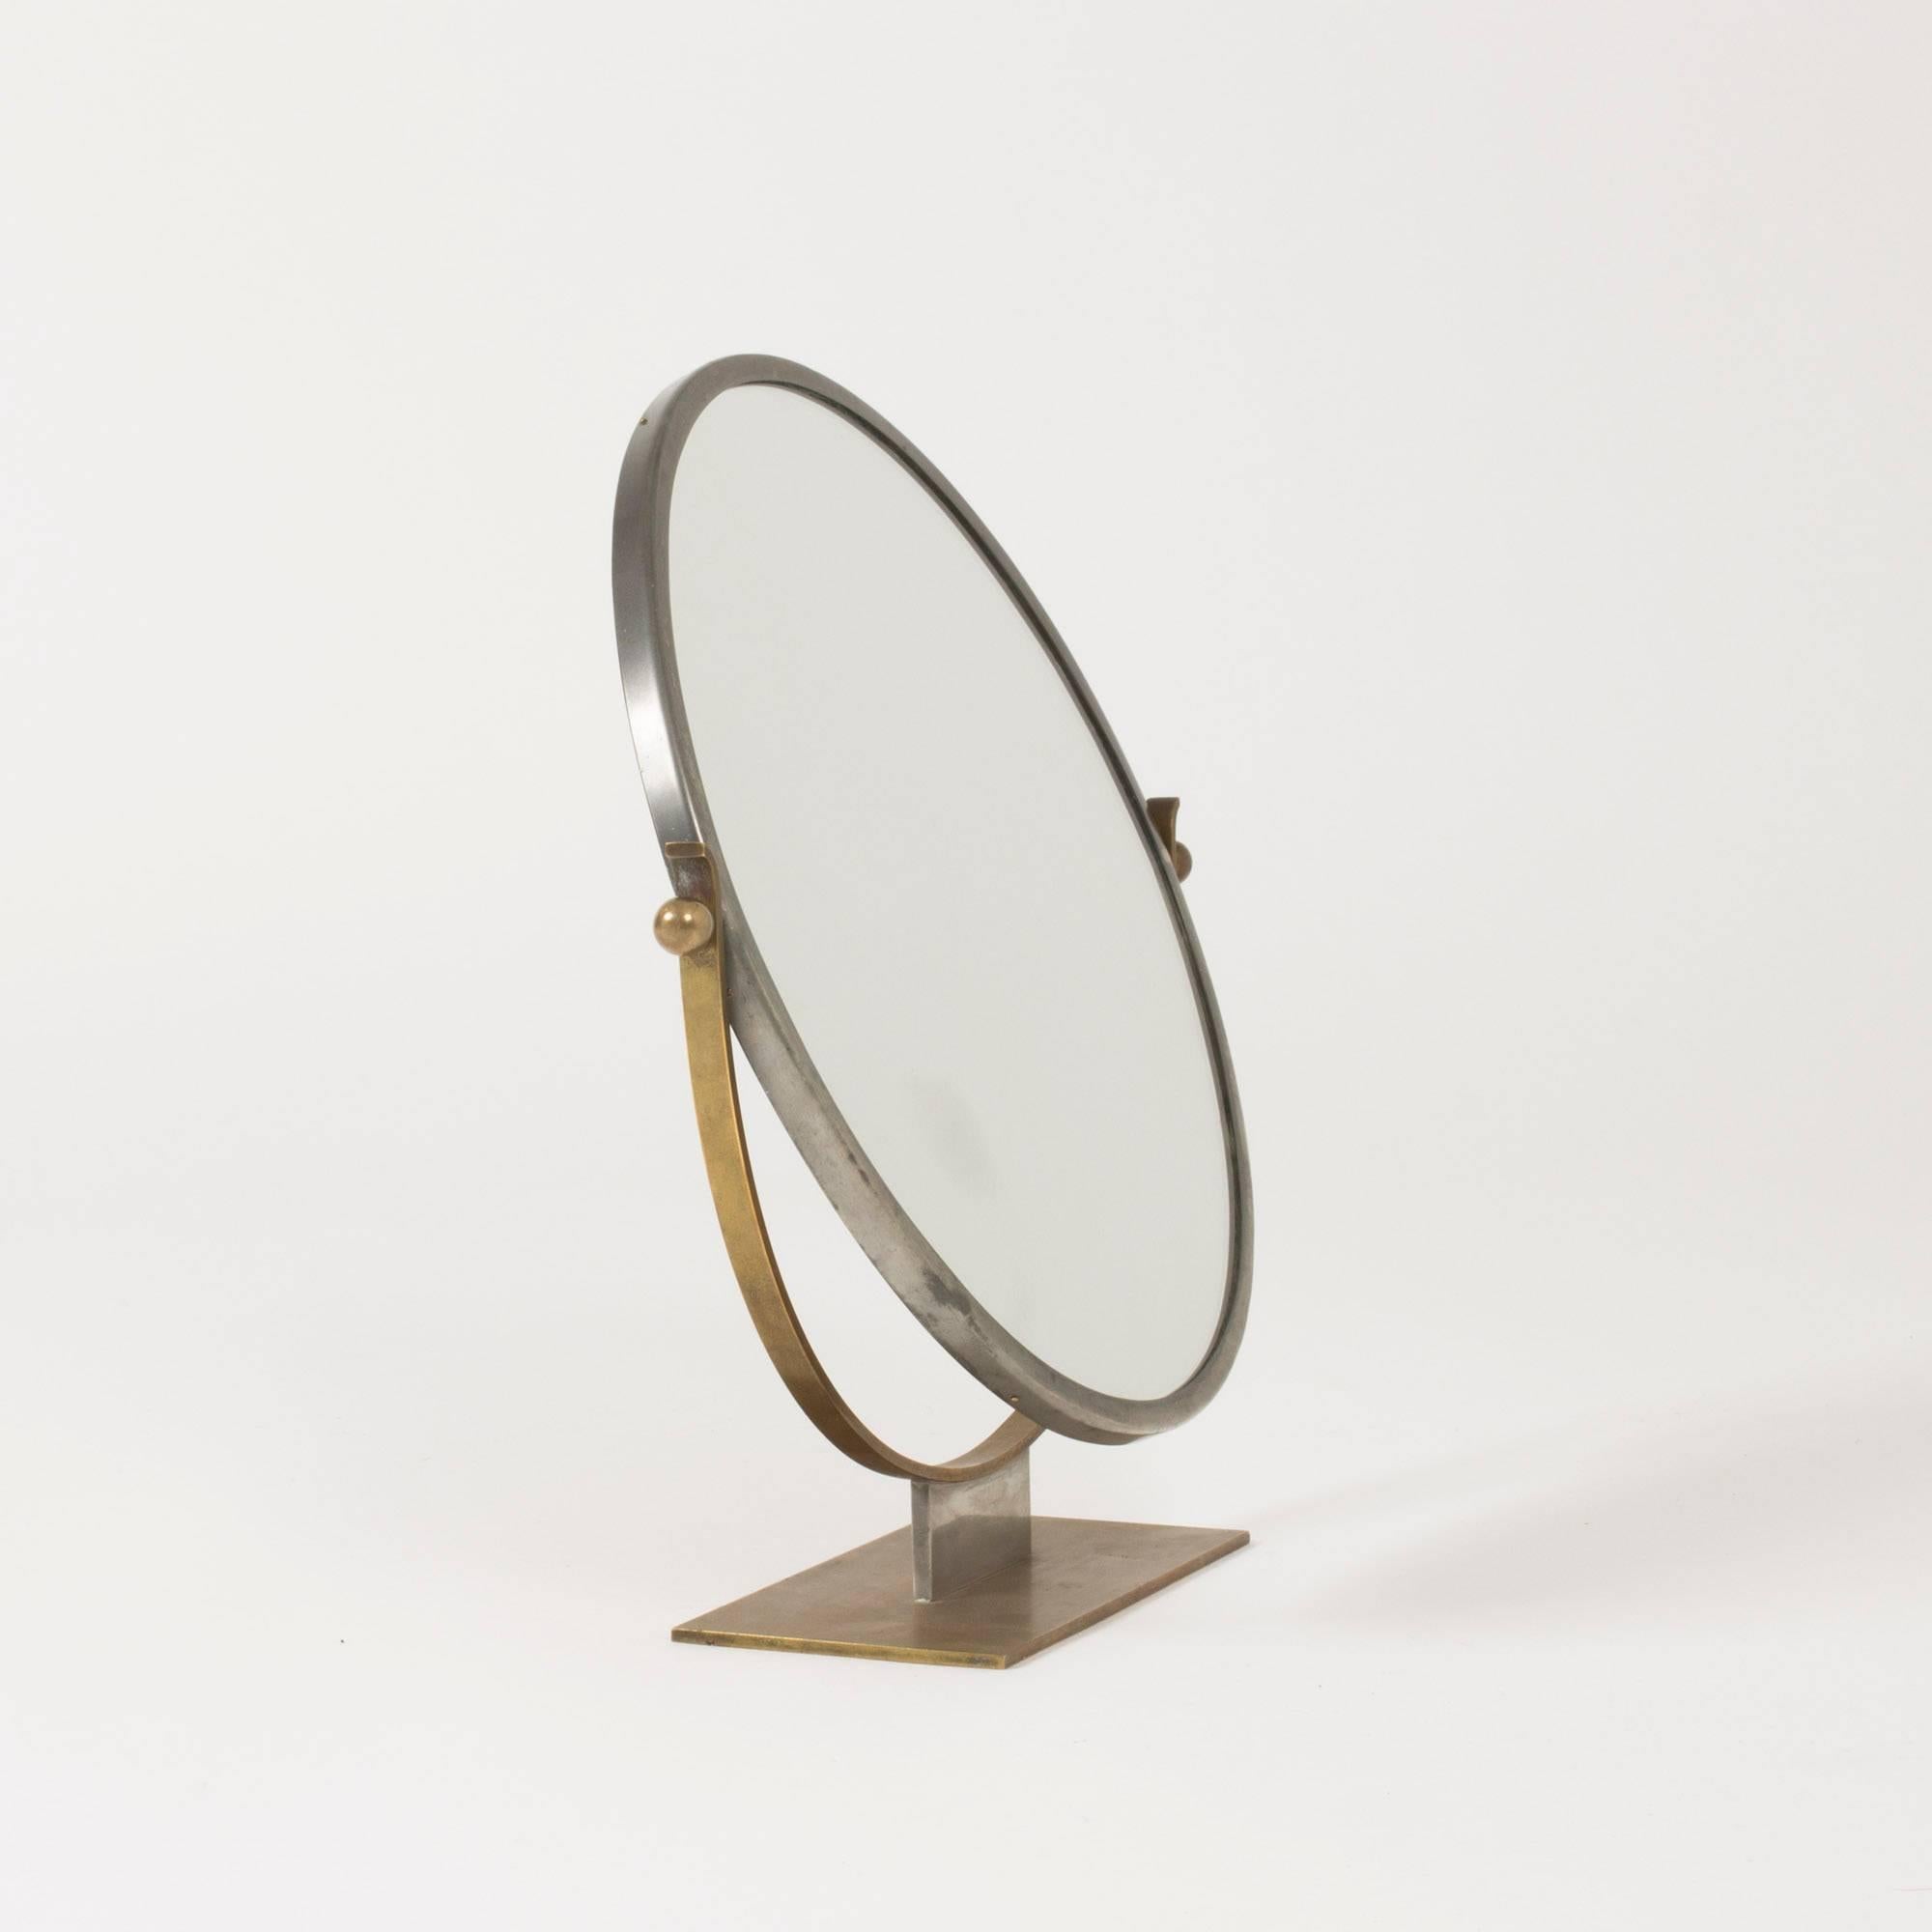 Functionalist table mirror by Ivar Ålenius-Björk, with strict lines and a beautiful combination of brass and pewter.